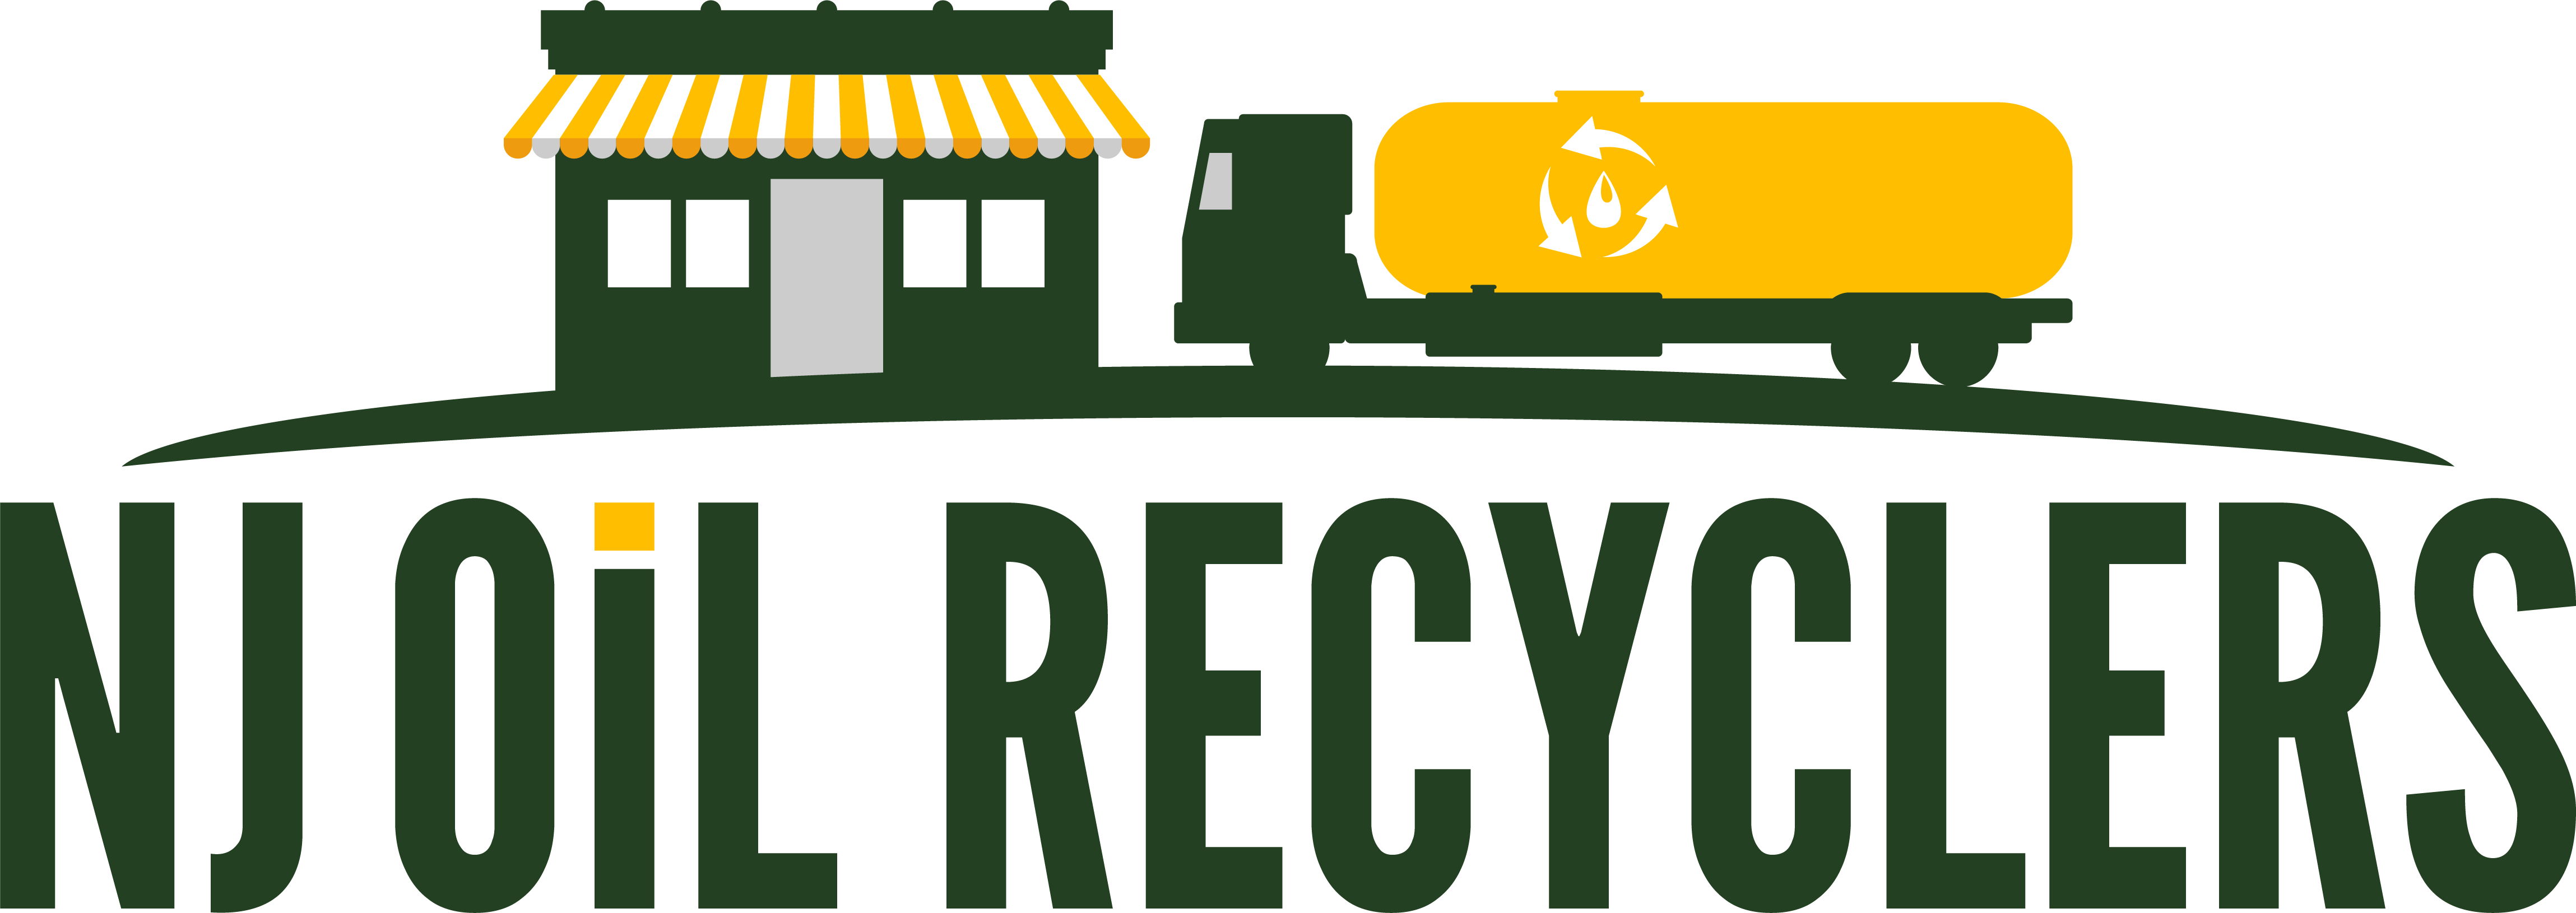 New Jersey Oil Recyclers